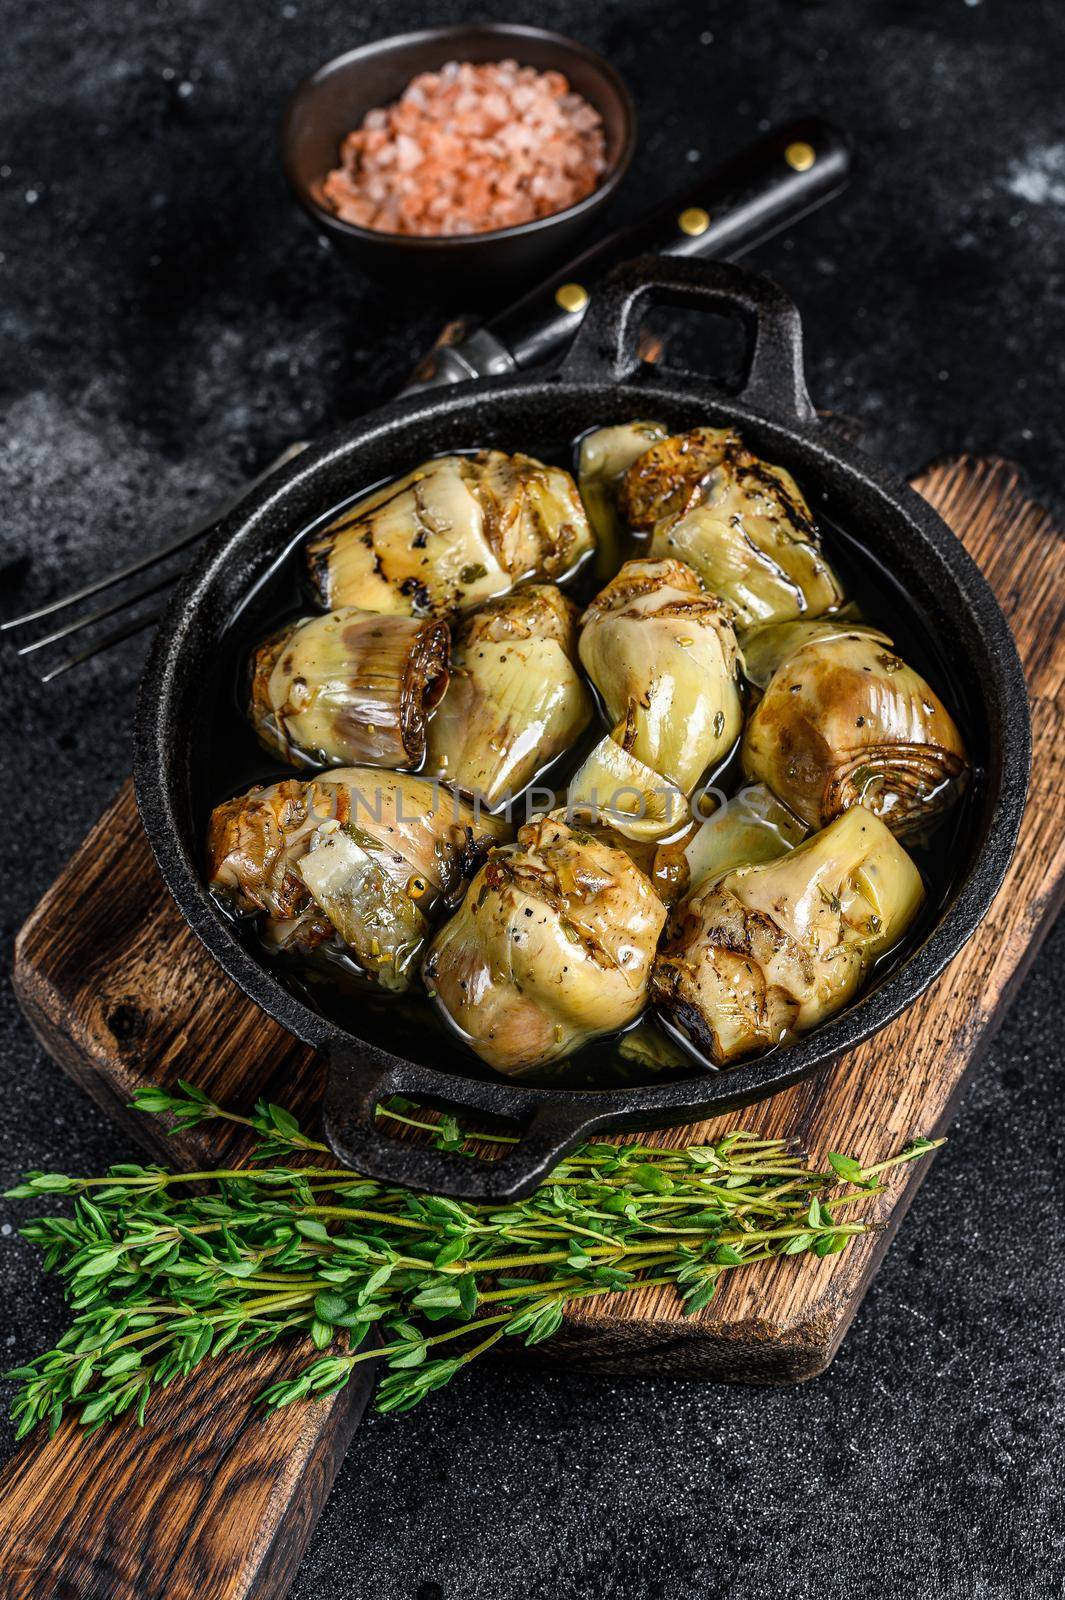 Canned artichokes in olive oil on a rustic wooden kitchen table. Black background. Top view by Composter